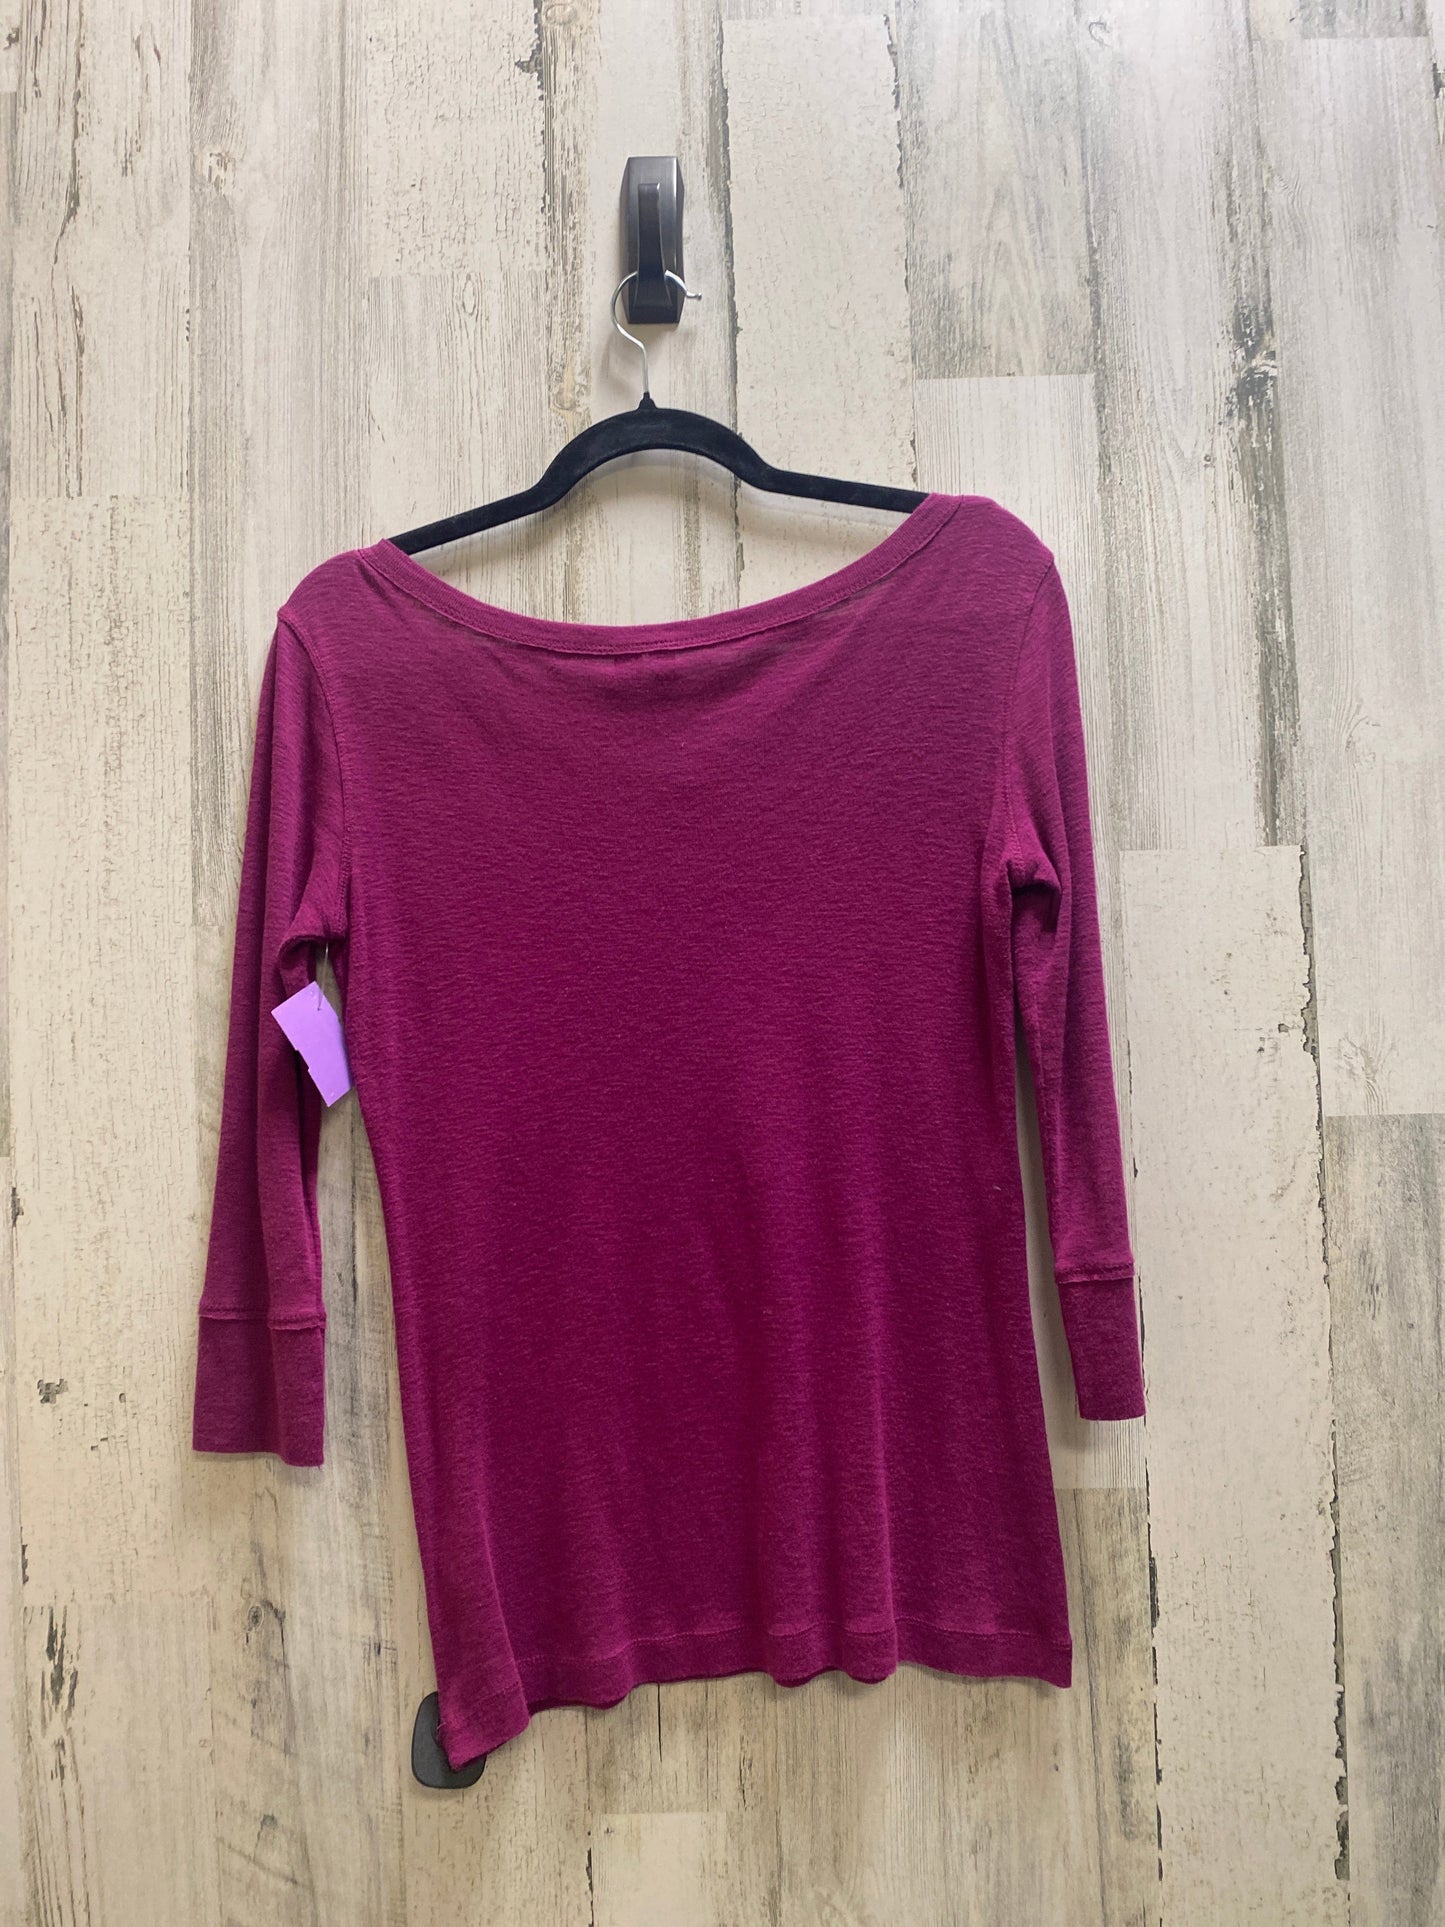 Top Short Sleeve By Cynthia Rowley  Size: S